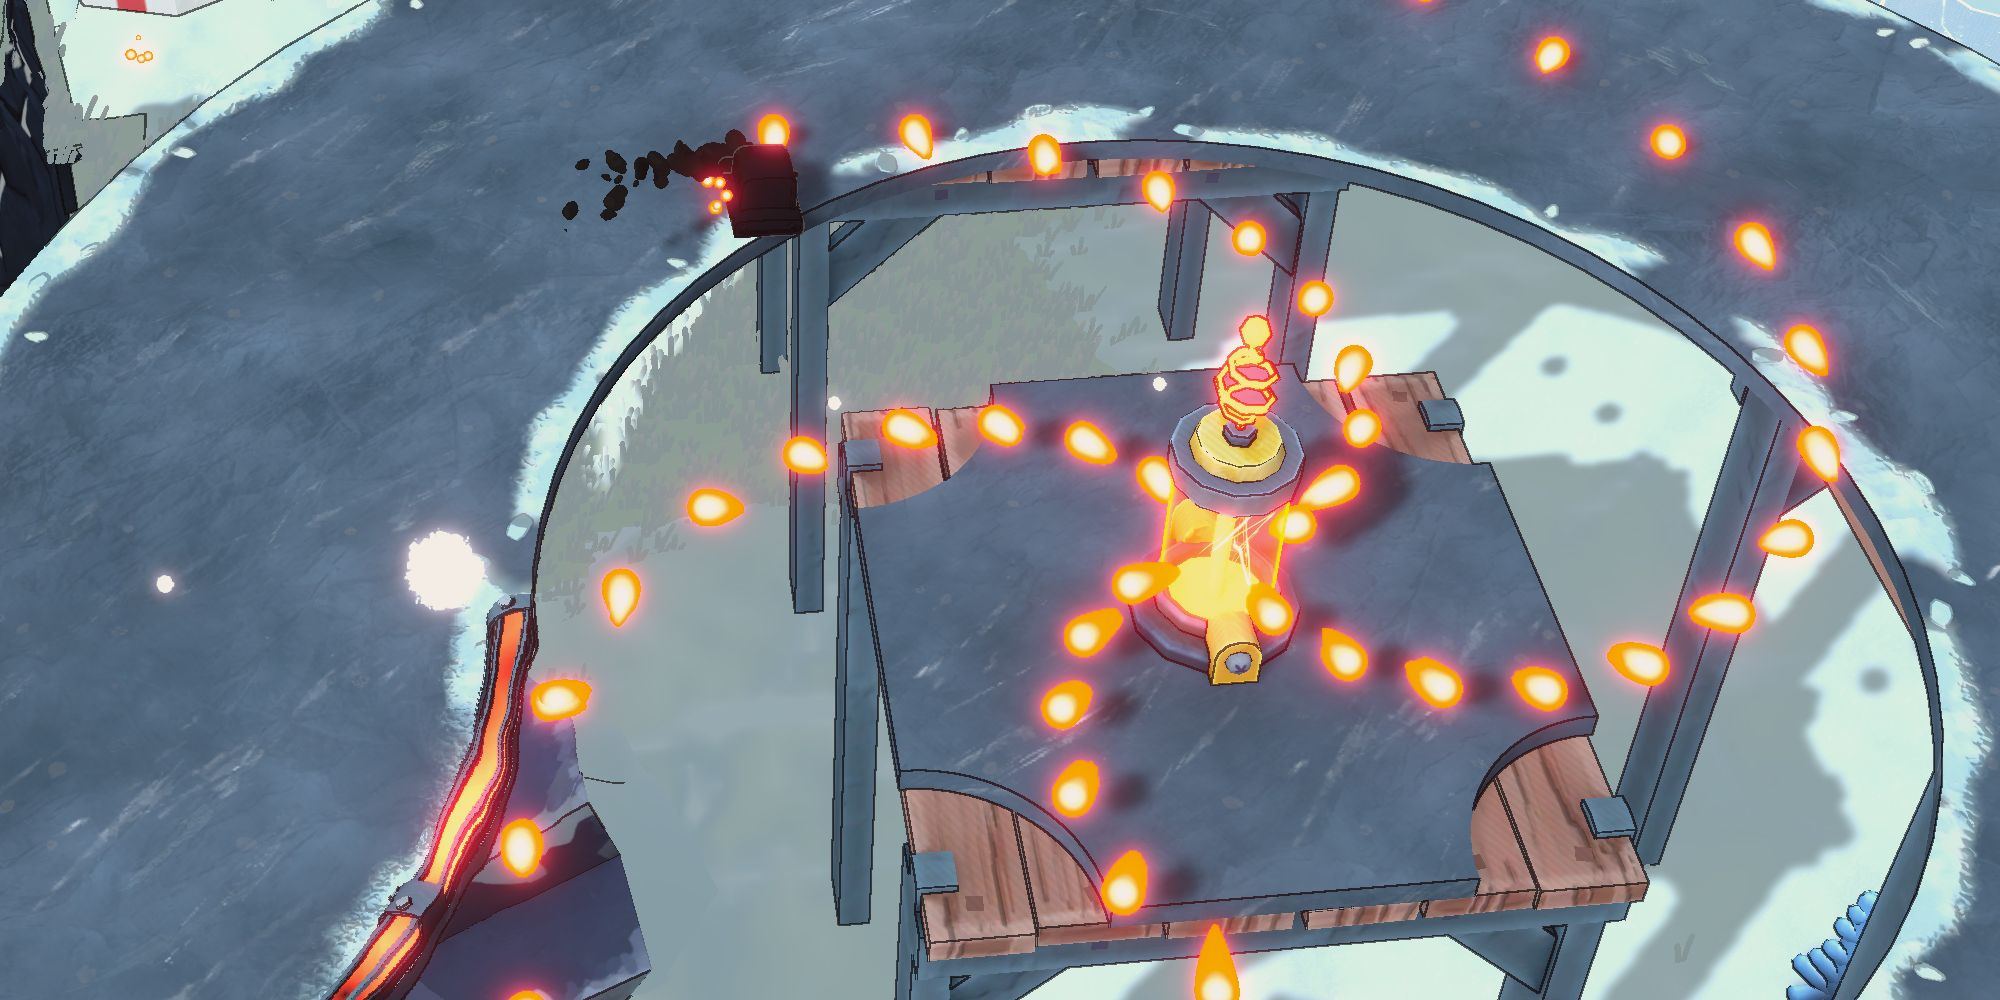 You Suck at Parking bullet hell